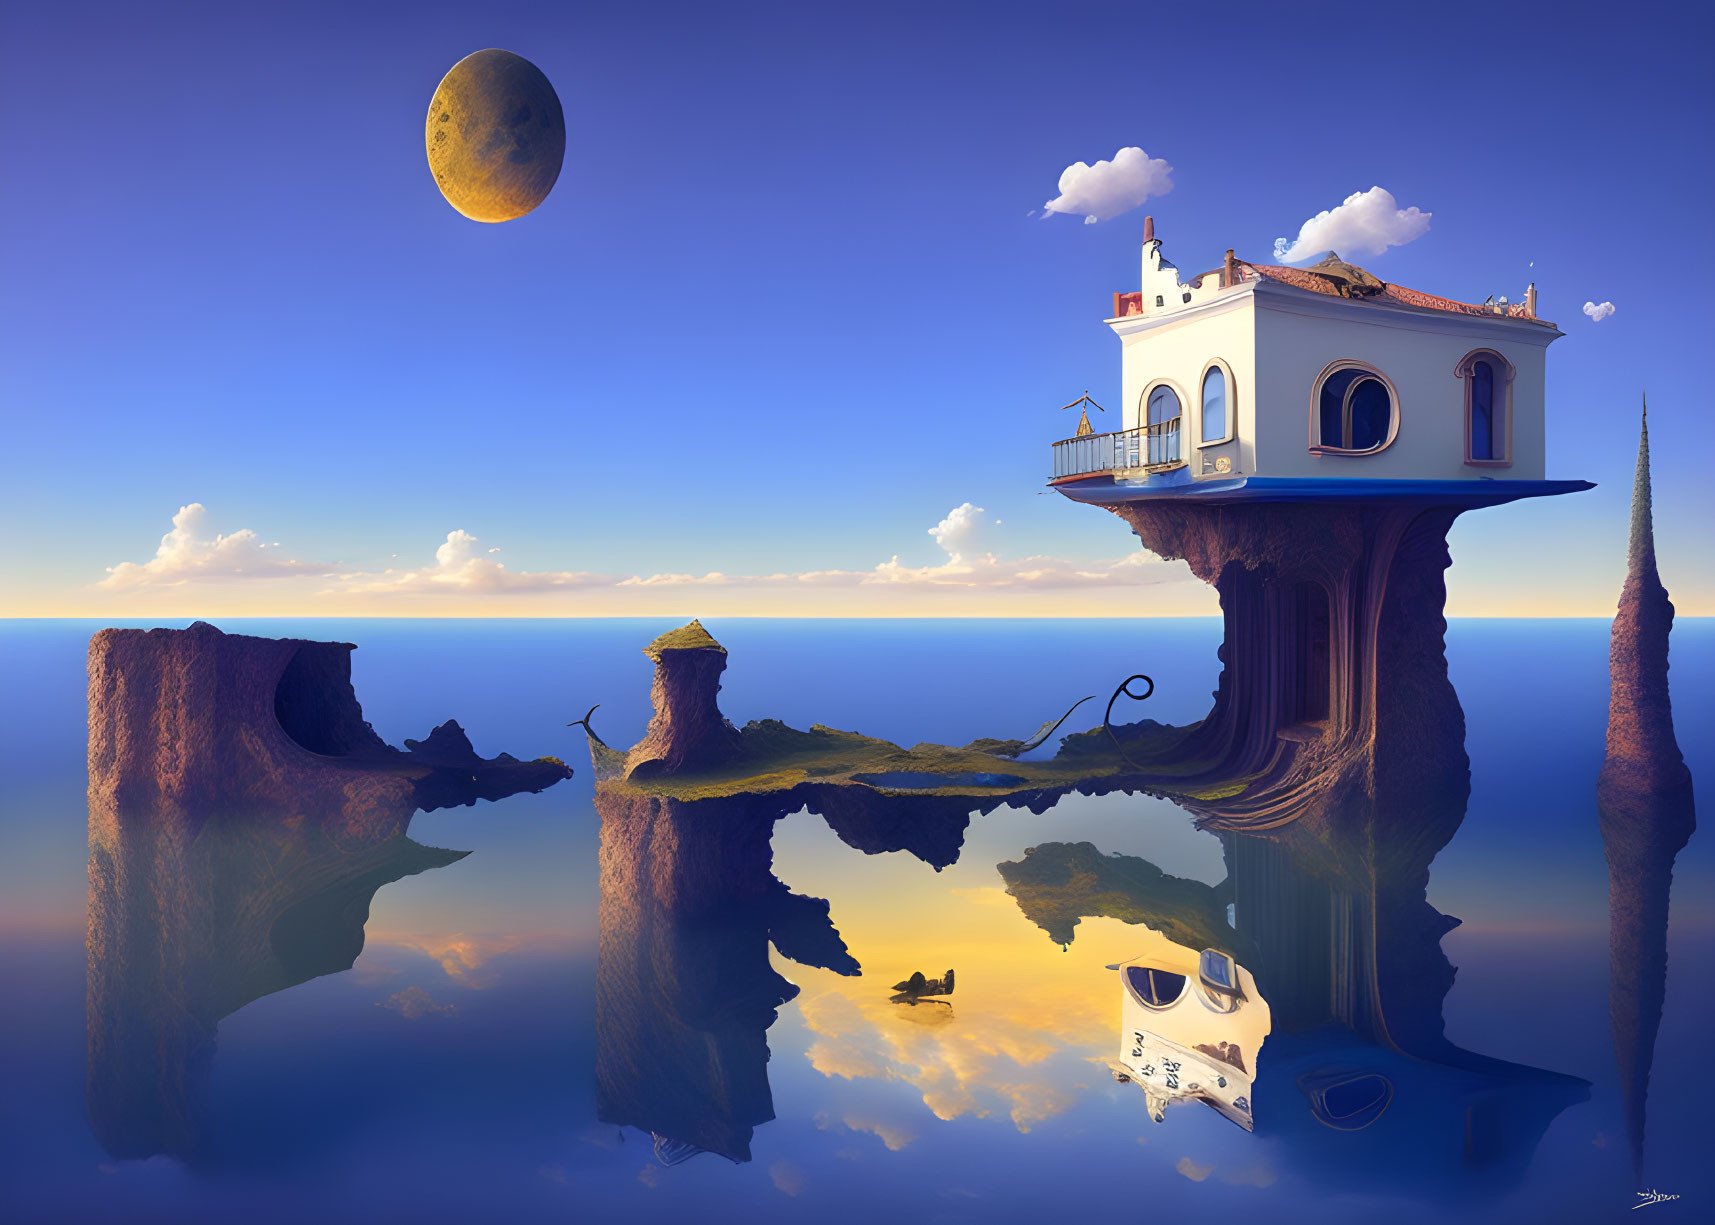 Surreal Mediterranean-style house on floating rock island with moon in sky